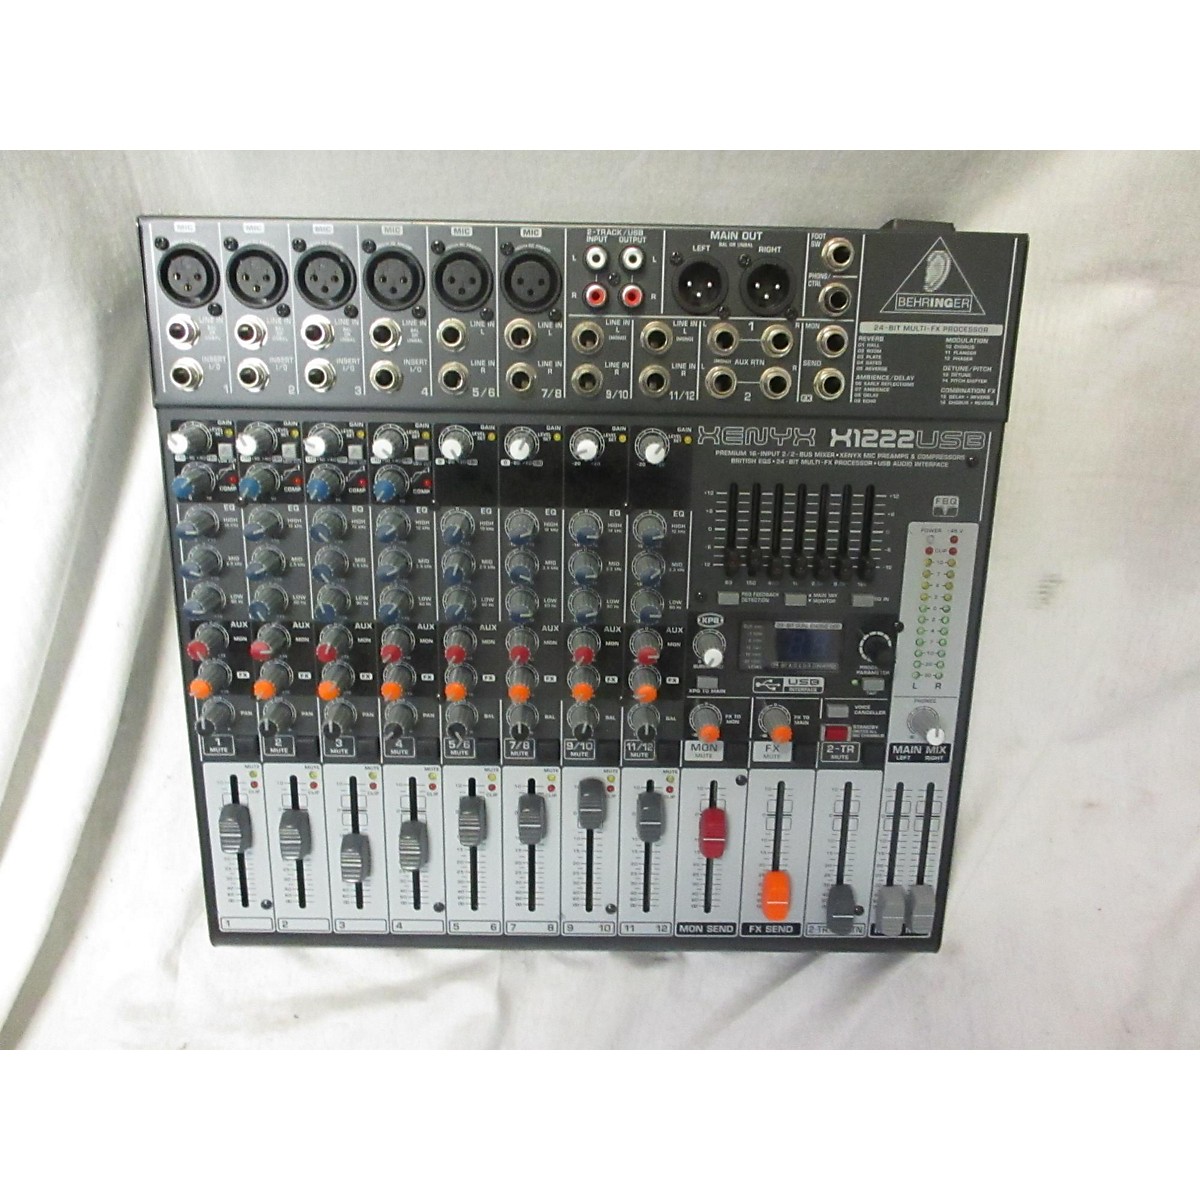 behringer xenyx x1204usb overview